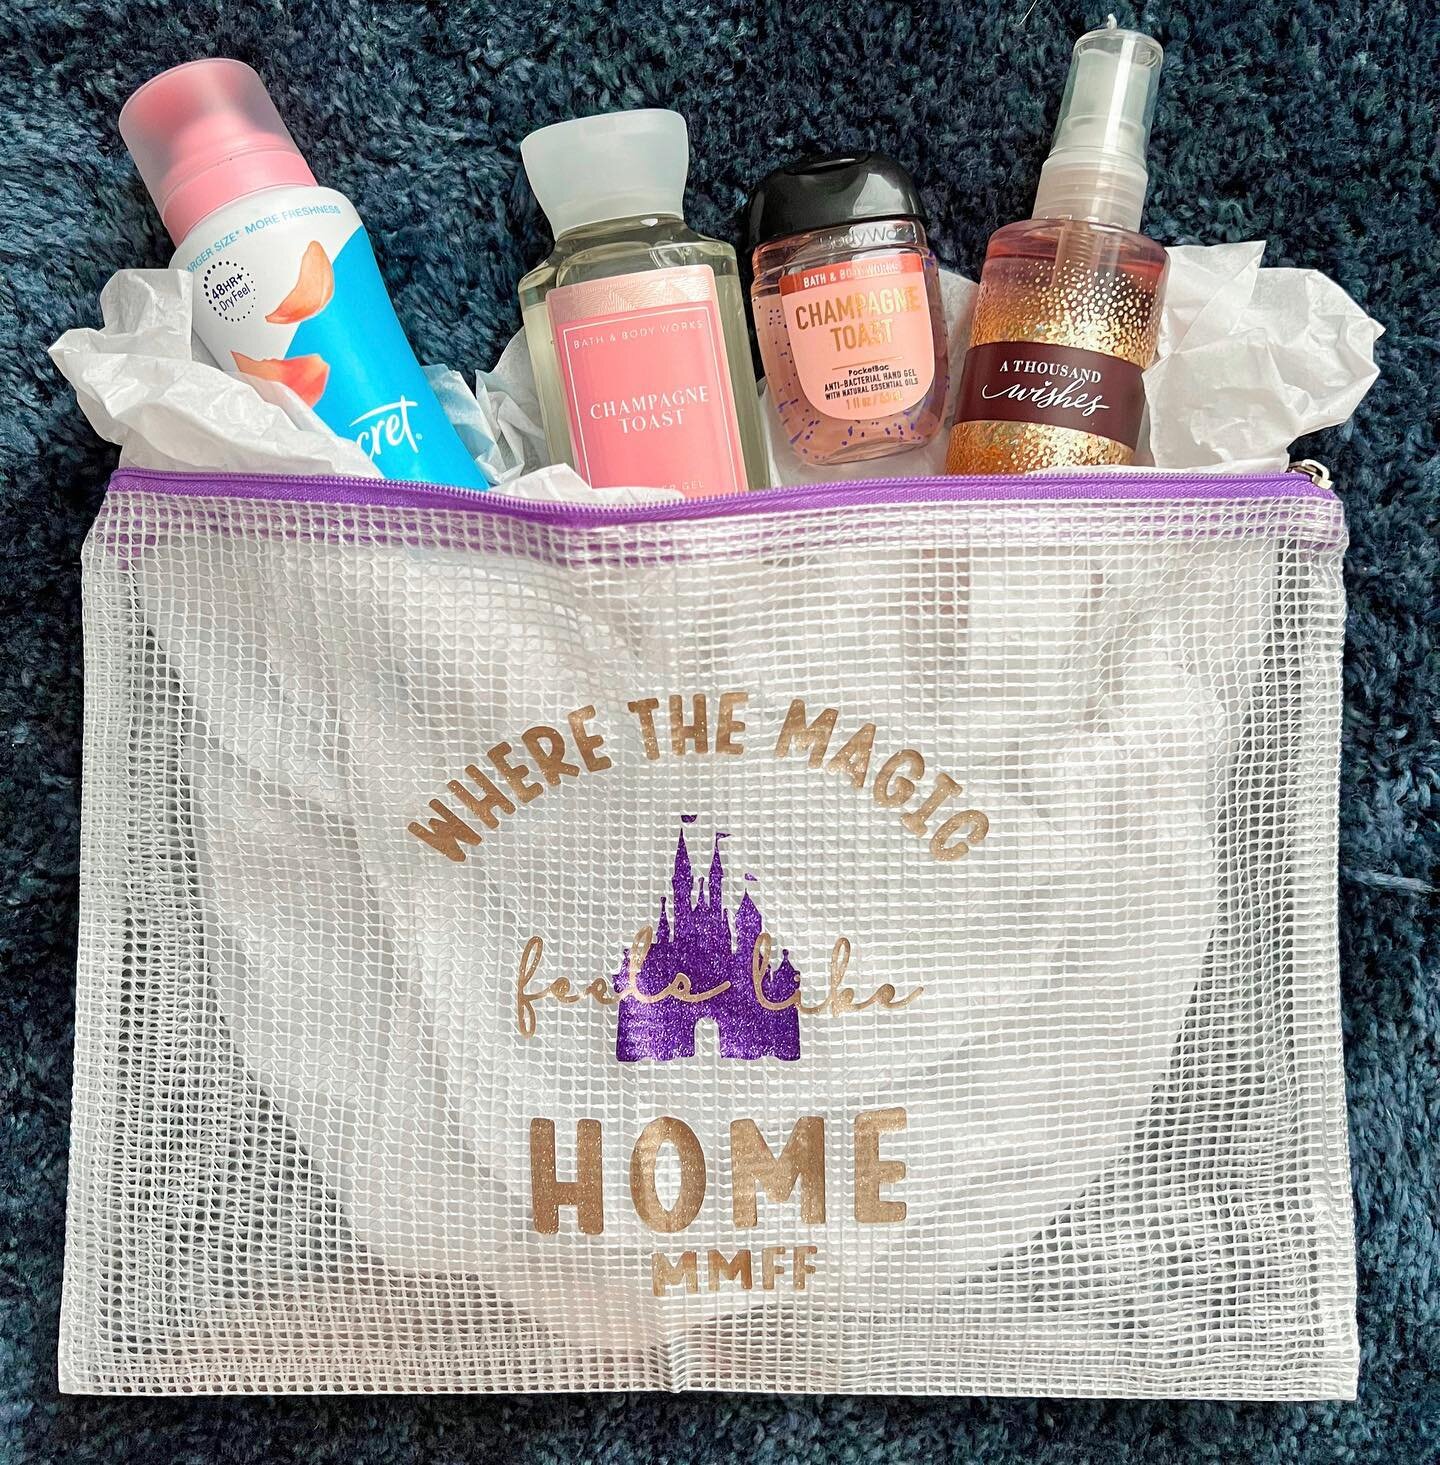 Gift Goelz 😜 🏰 

I put this little gift together for a friend, and I love how I was able to add a personal touch by packaging it in this pouch 💜 These pouches are a great catch all, come in several sizes, several zipper colors, and are adorable pe